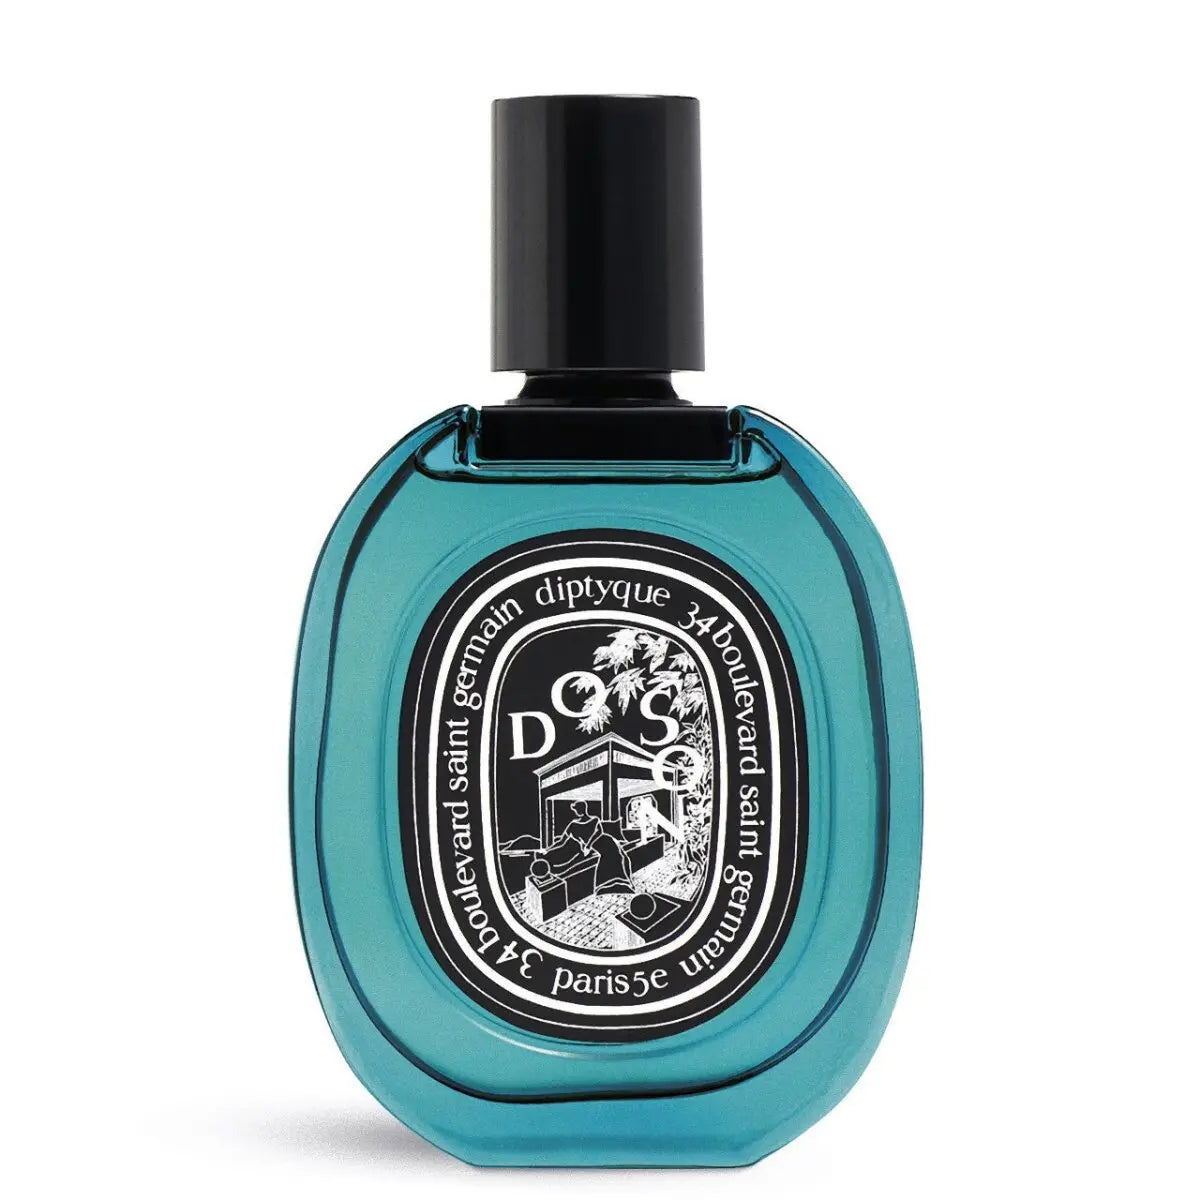 Diptyque Do Son edp limited - 75 ml